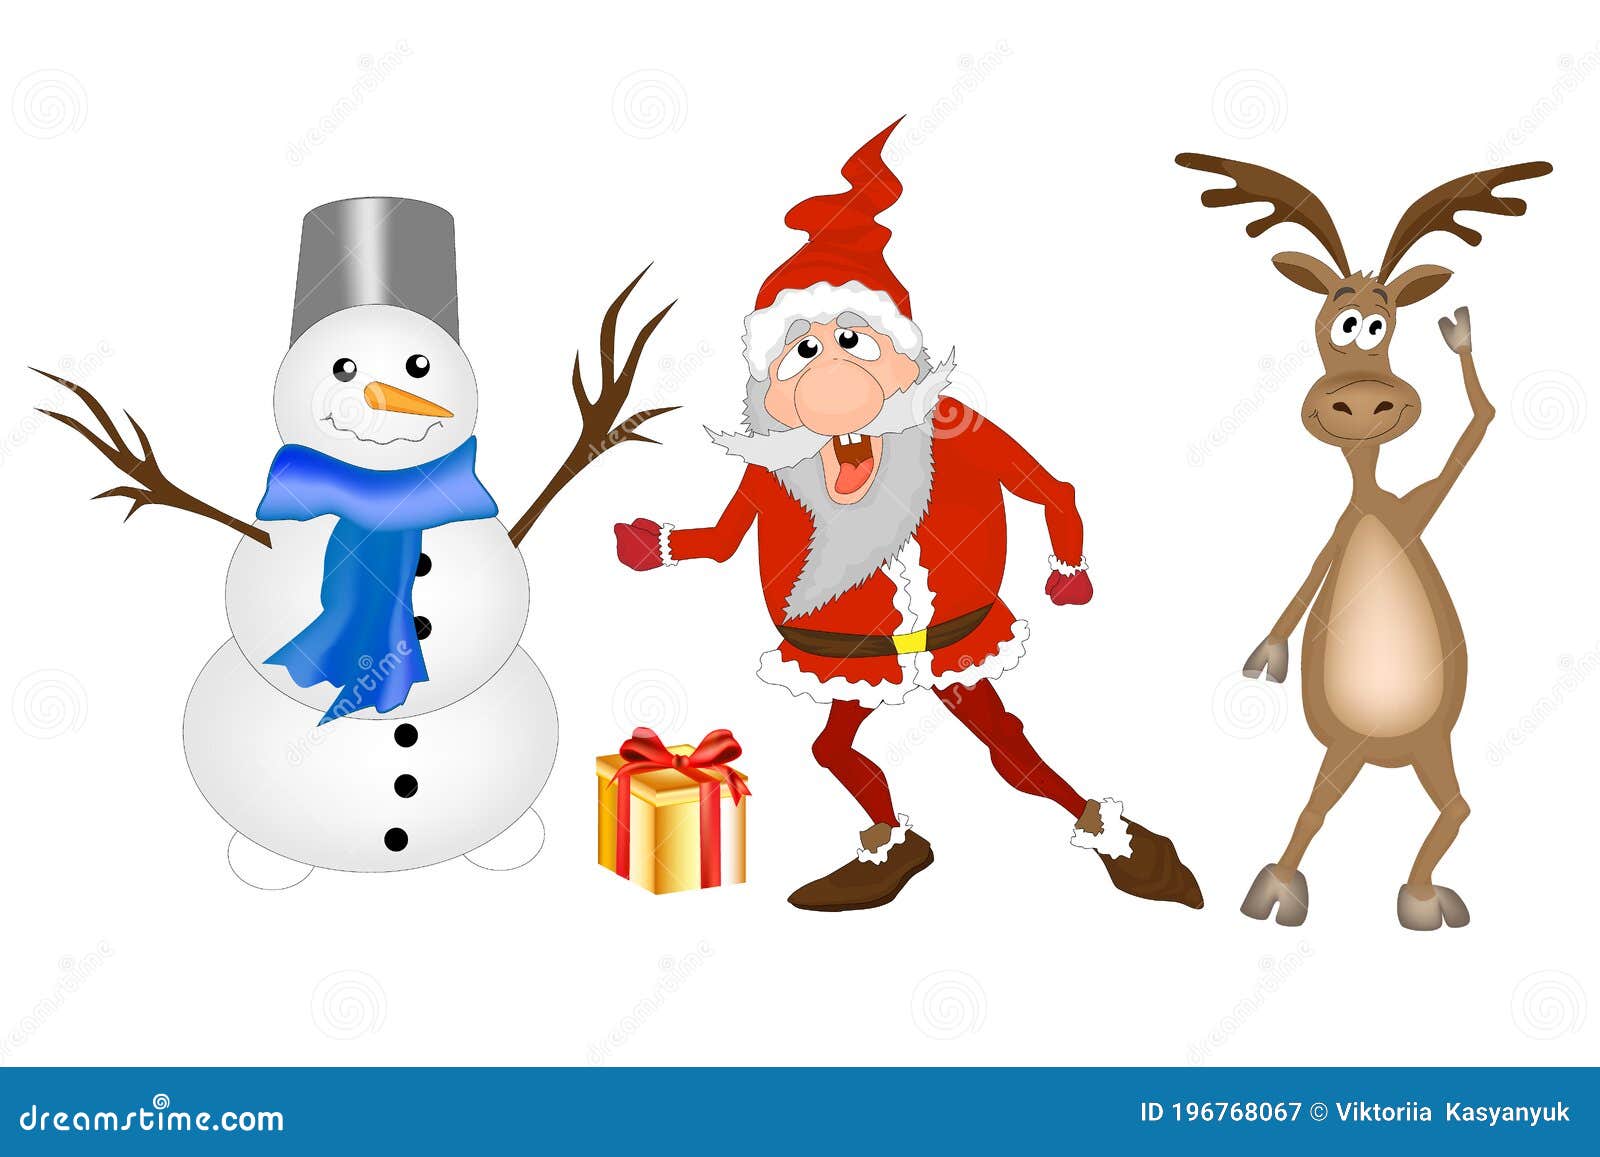 New Year. Vector Christmas Illustration with Funny Cartoons Characters  Stock Illustration - Illustration of reindeer, decoration: 196768067